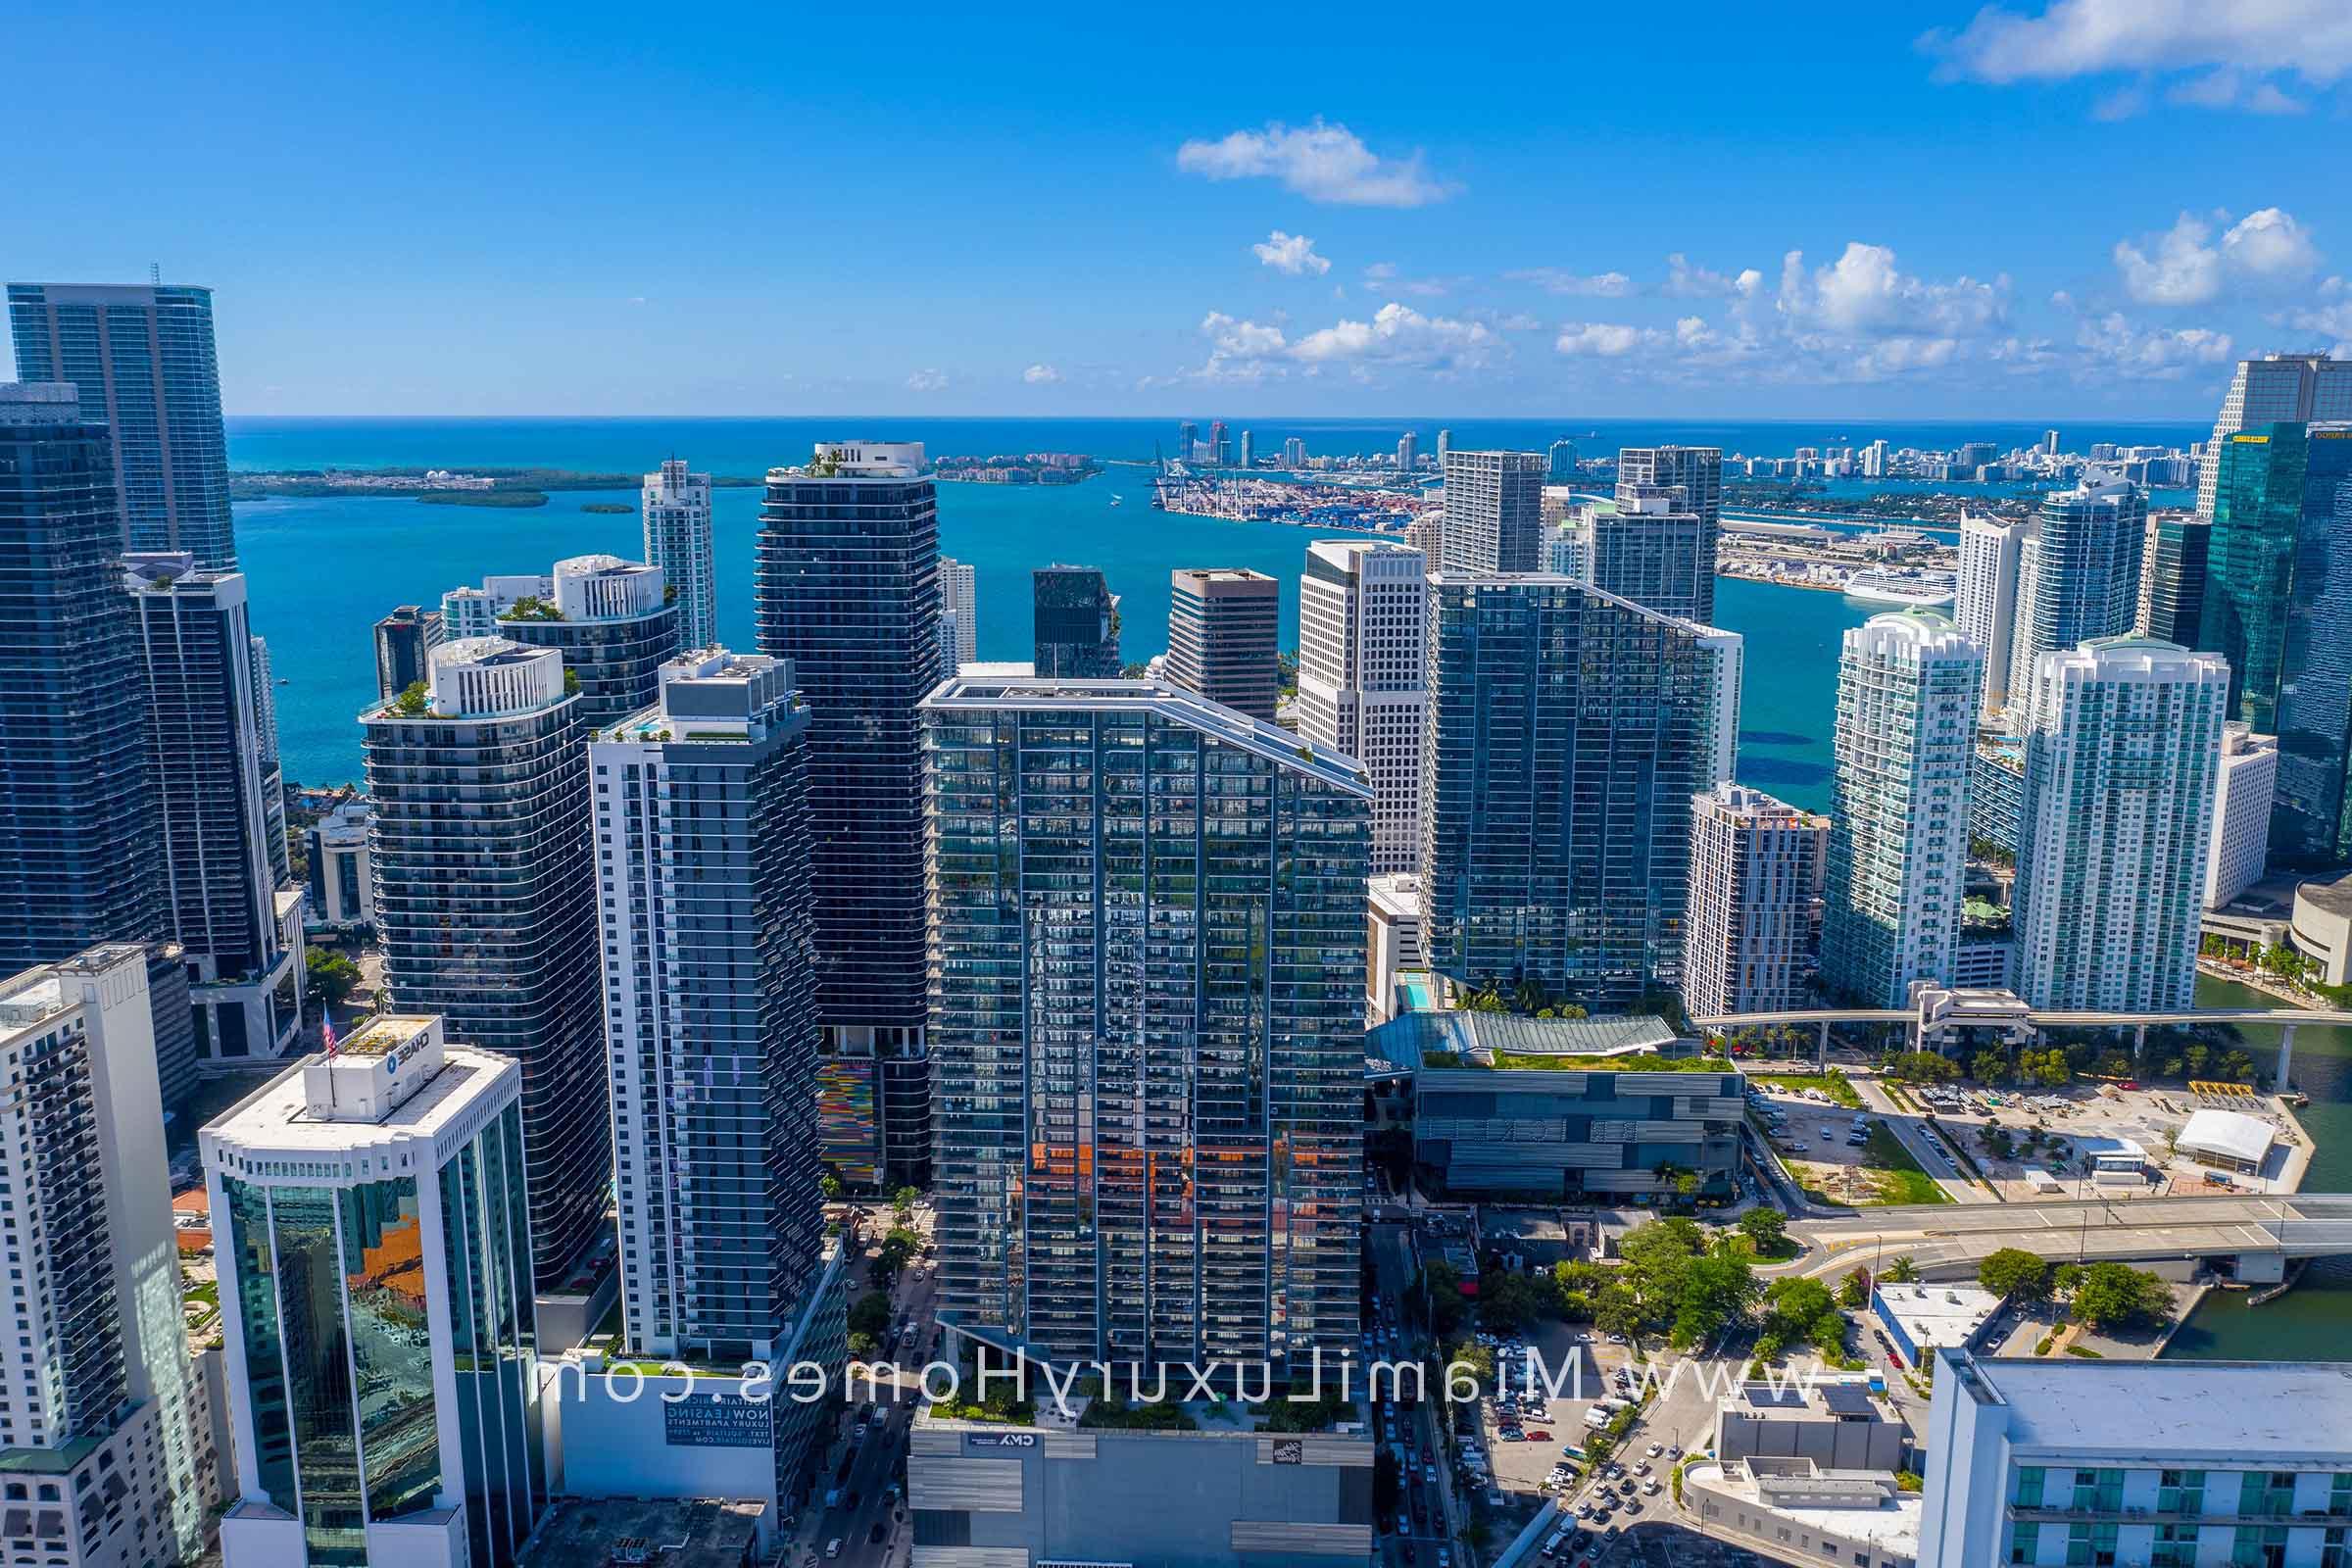 Aerial View of Brickell City Centre